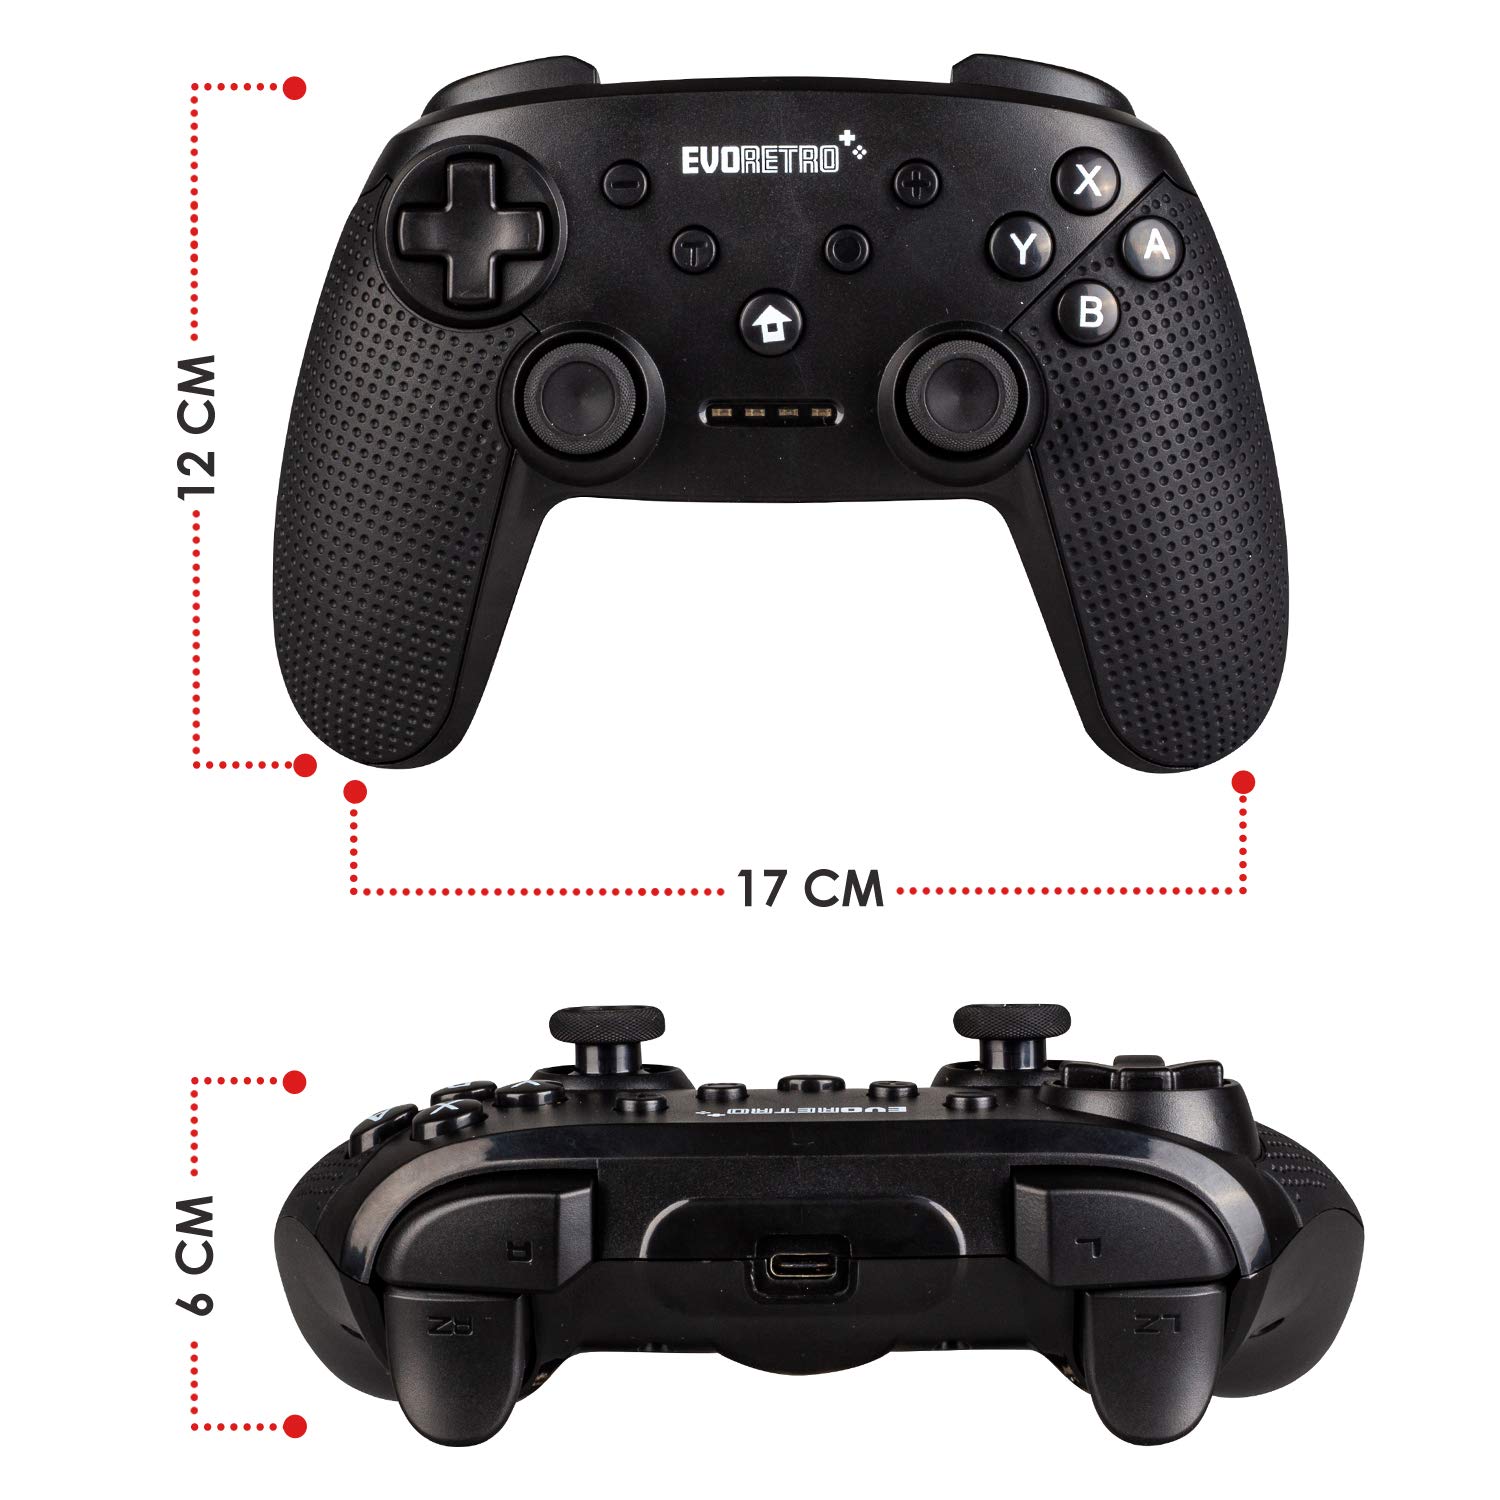 EVORETRO Switch Wireless Bluetooth Controller Compatible for Nintendo Switch Pro (Black) | PC Gamepad Joypad Remote with Gyro Axis (Turbo Buttons)